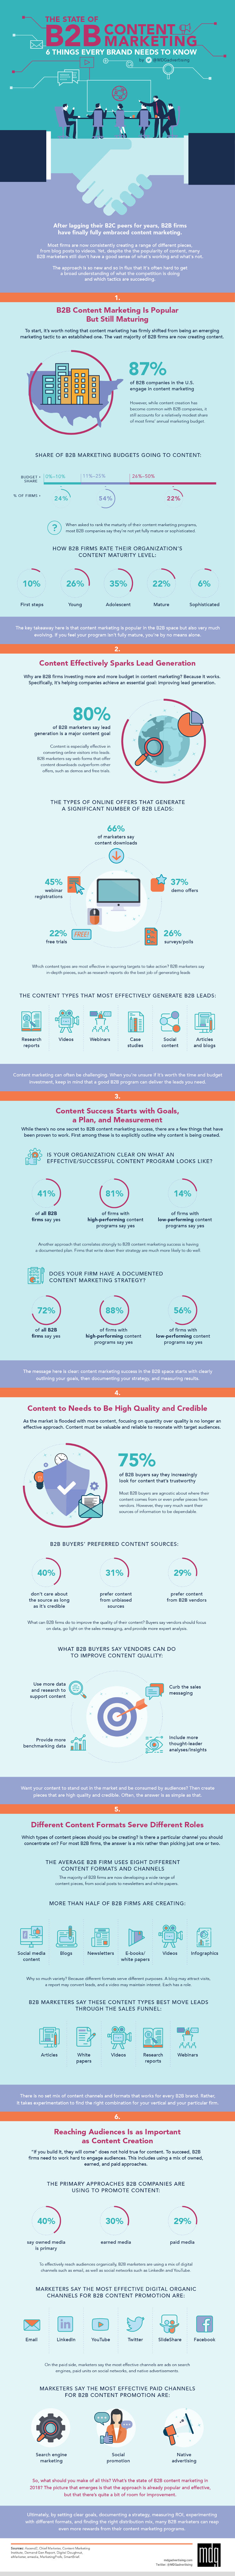 Six Important Points About the State of B2B Content Marketing